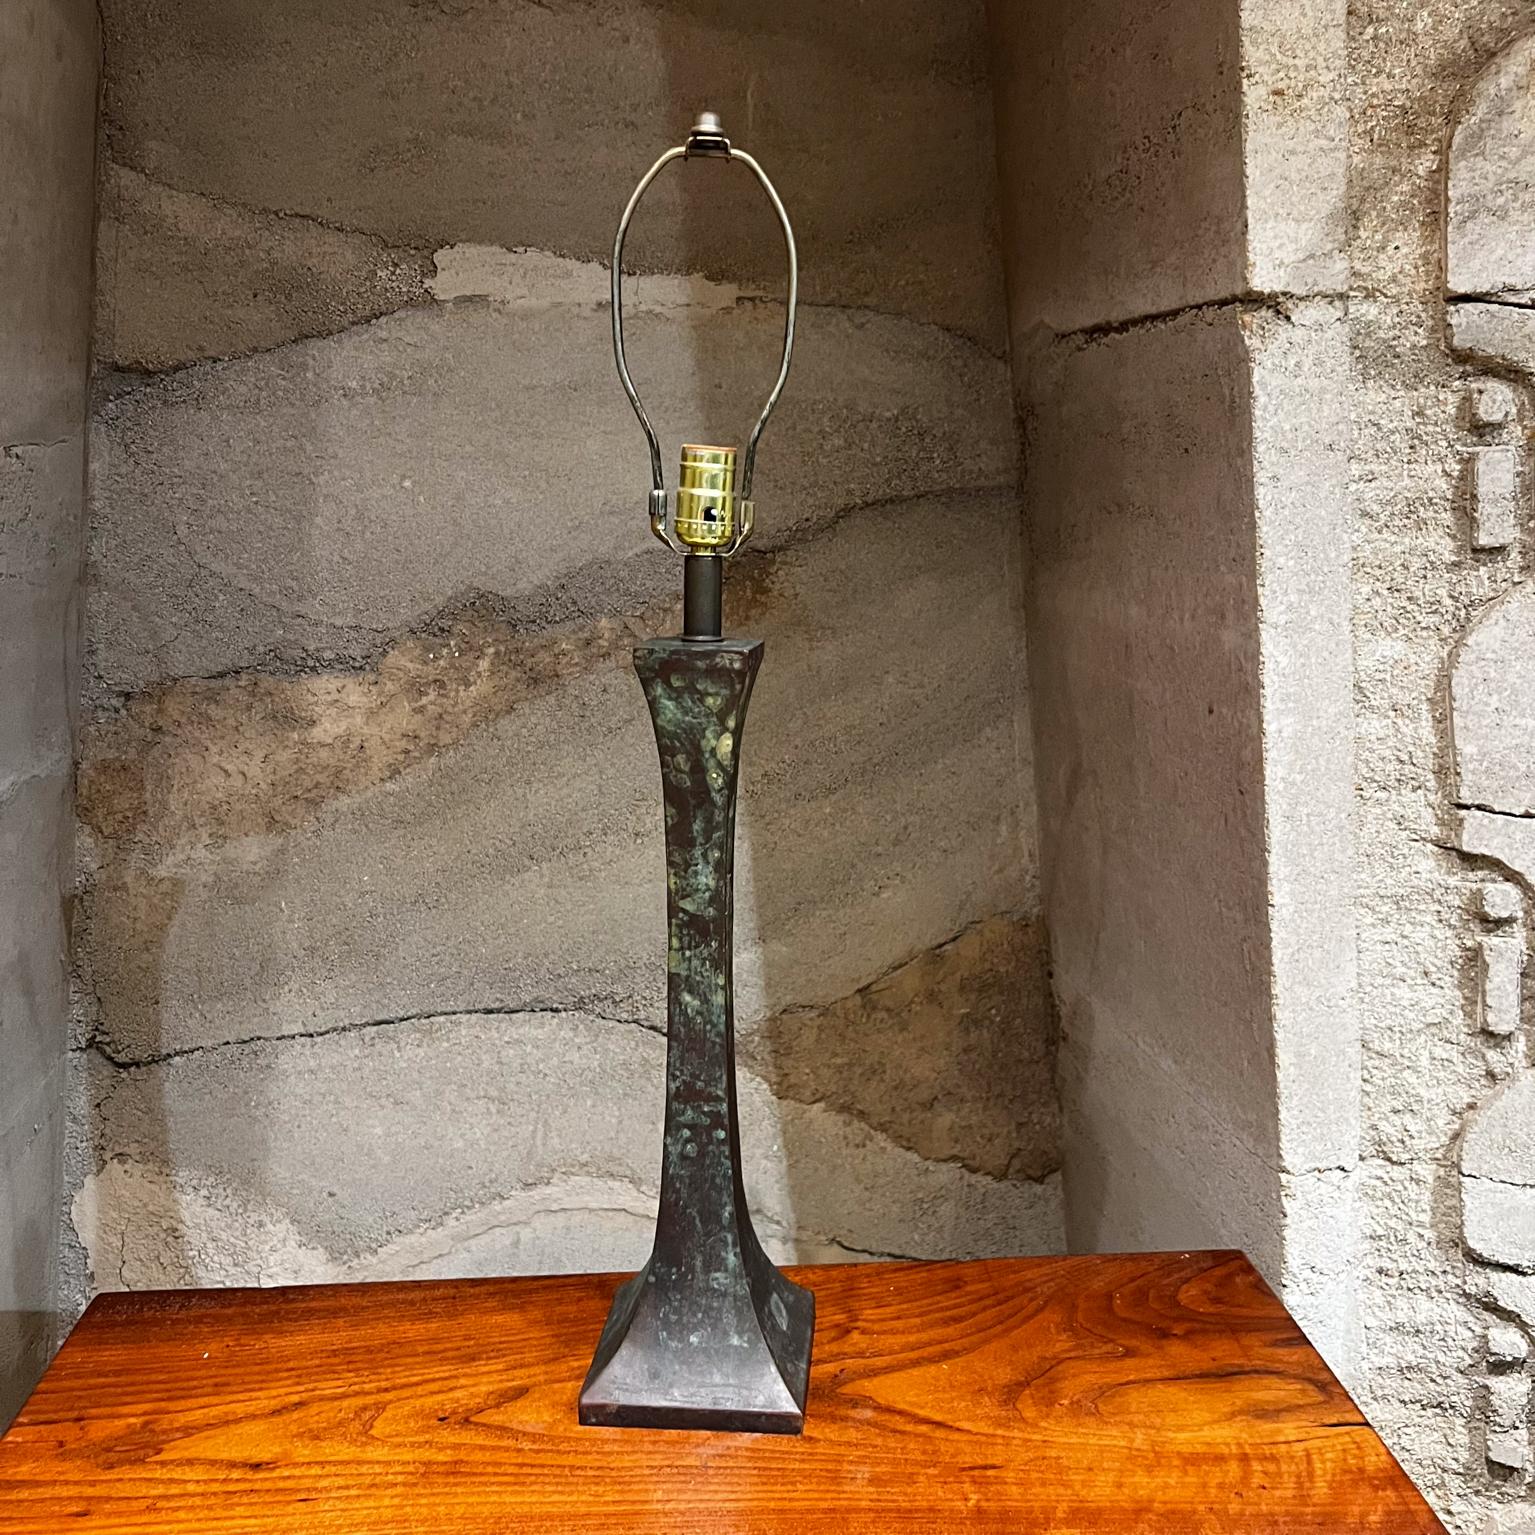 1970s Tapered Table Lamp in Bronze Stewart Ross James for Hansen
Special patina of turquoise, green and black.
22.75 h x 5.5 x 5.5
Preowned Original vintage condition.
Wear consistent with use and age.
No shade is included.
Please refer to images